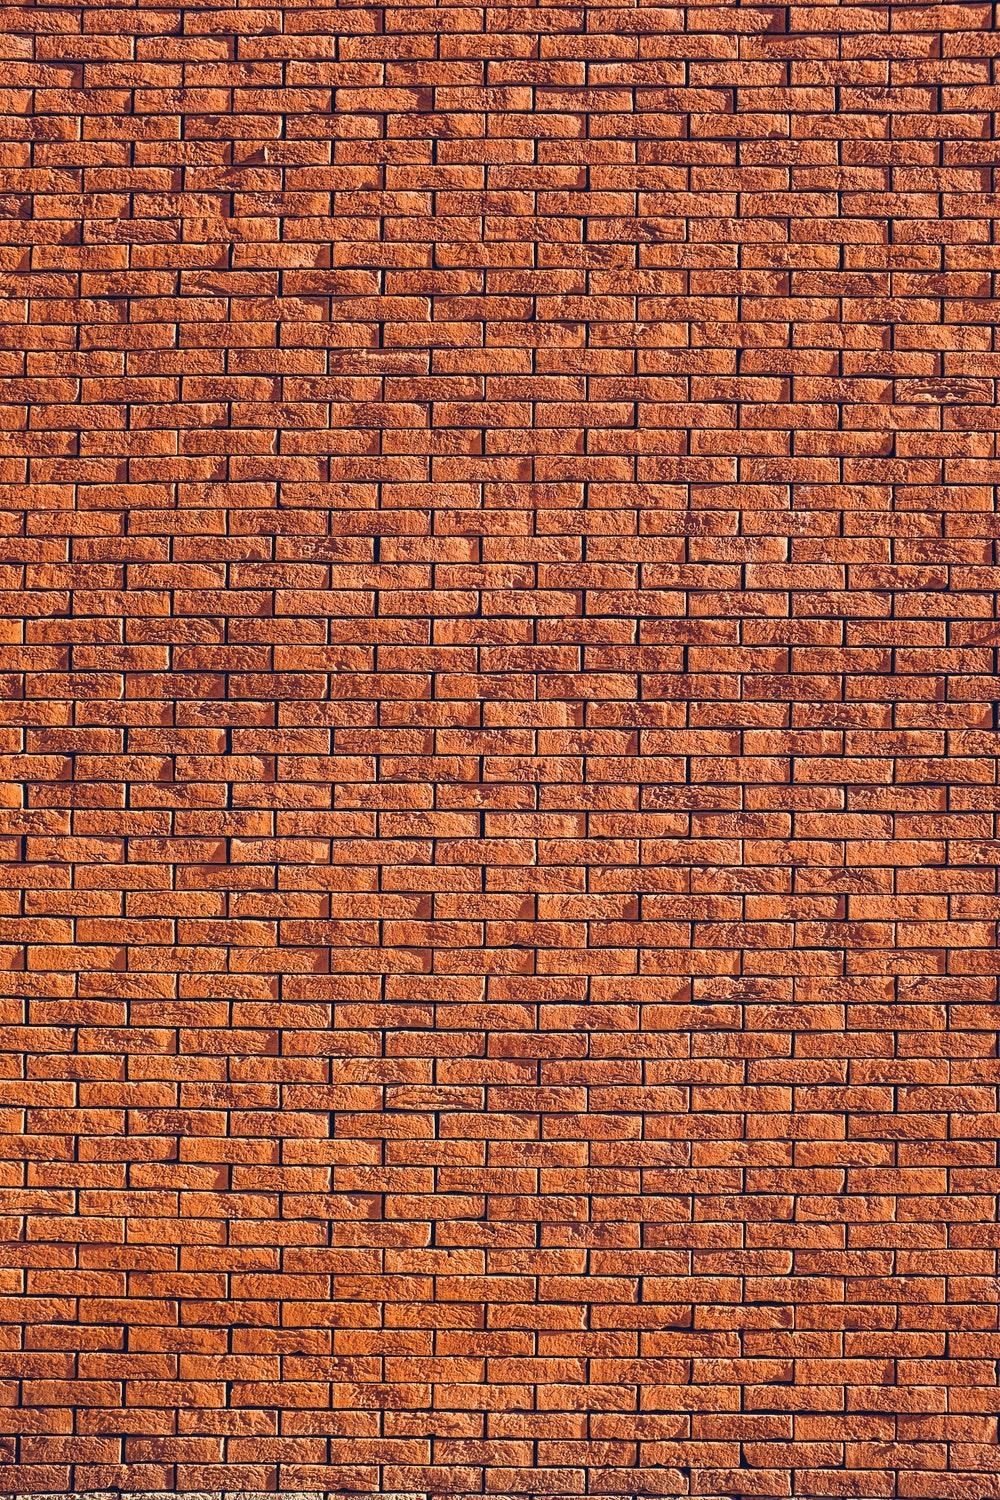 Brick Picture. Download Free Image